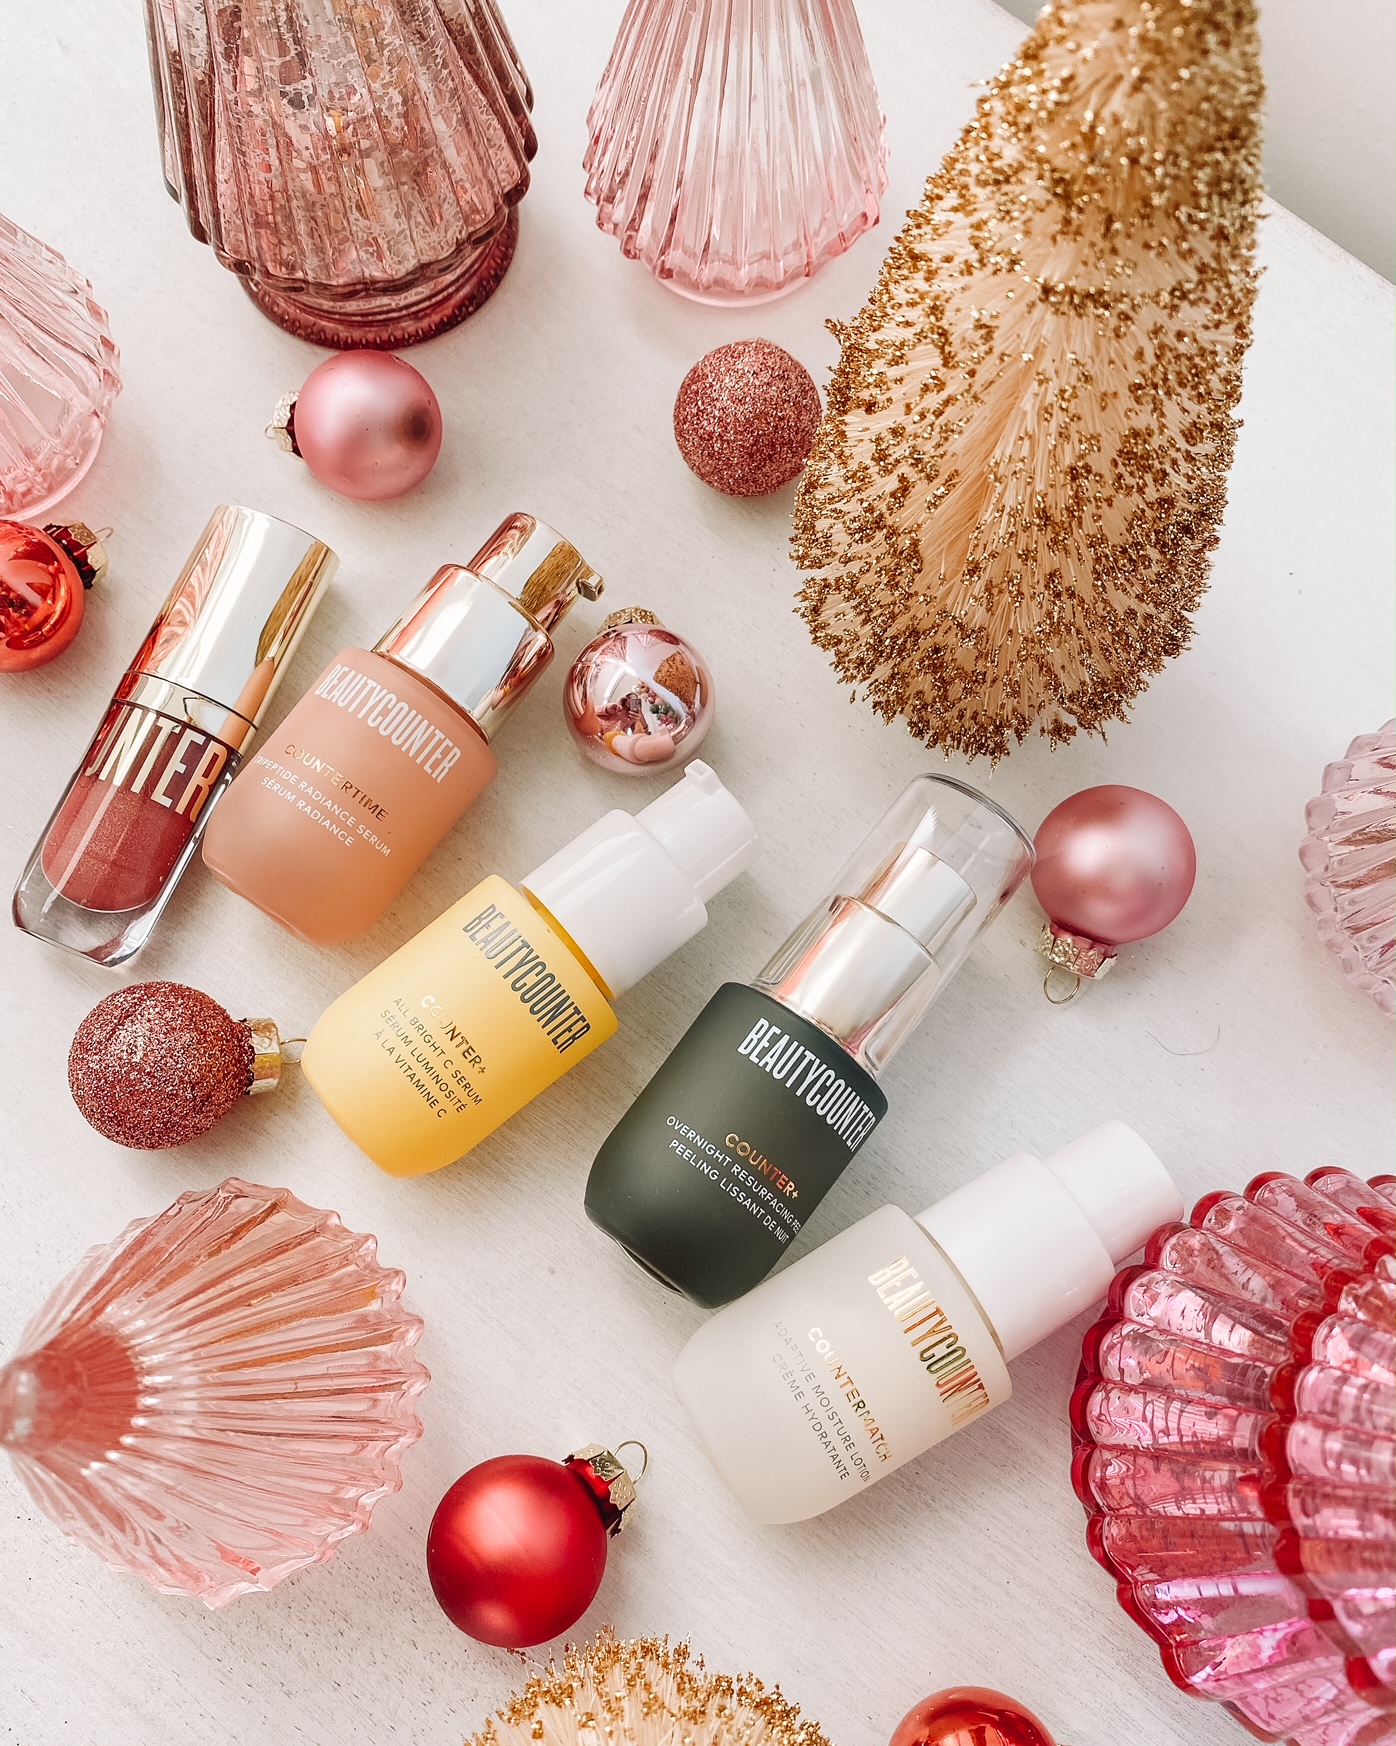 LIMITED EDITION CLEAN BEAUTY GIFT GUIDE